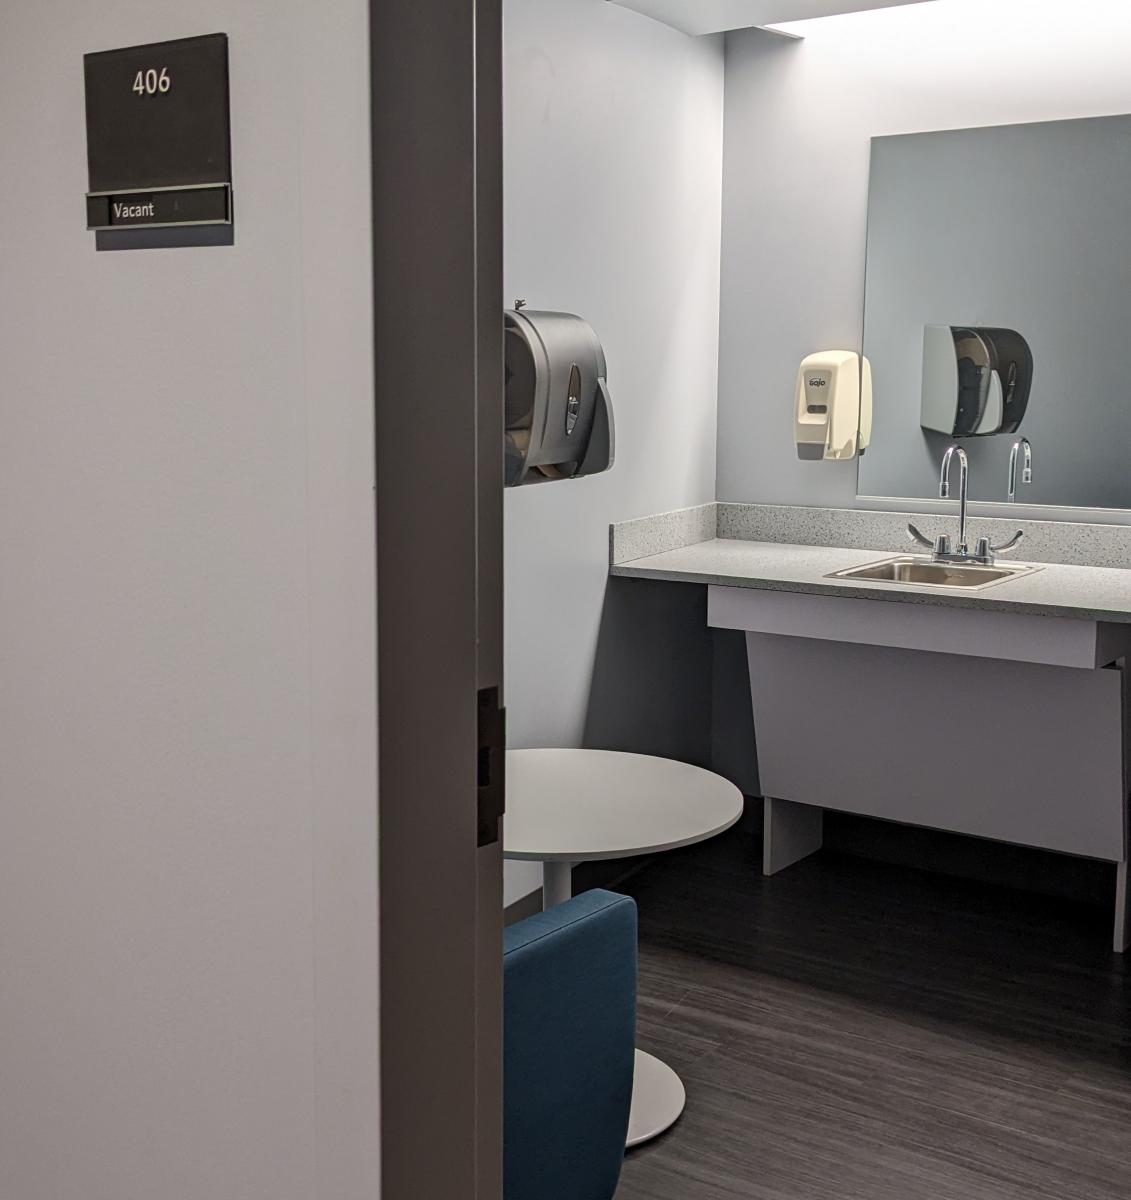 Image of a lactation room at Lehigh that includes a comfortable chair, table and sink.